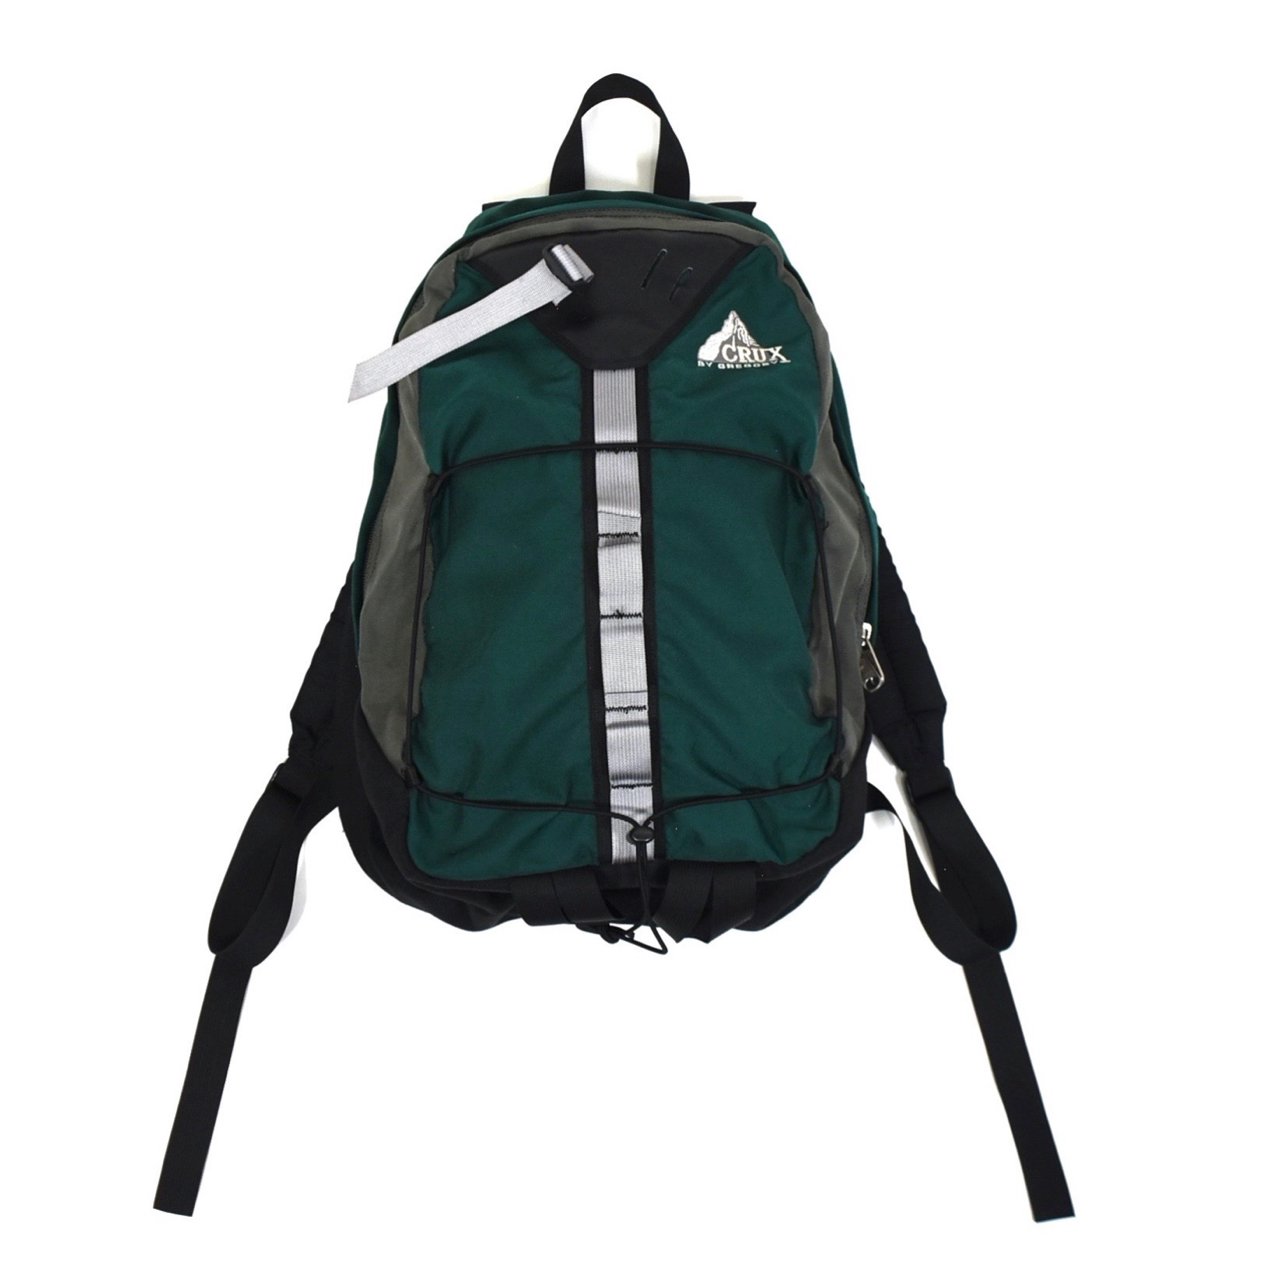 1990s CRUX BY GREGORY Daypack MADE IN USA Green